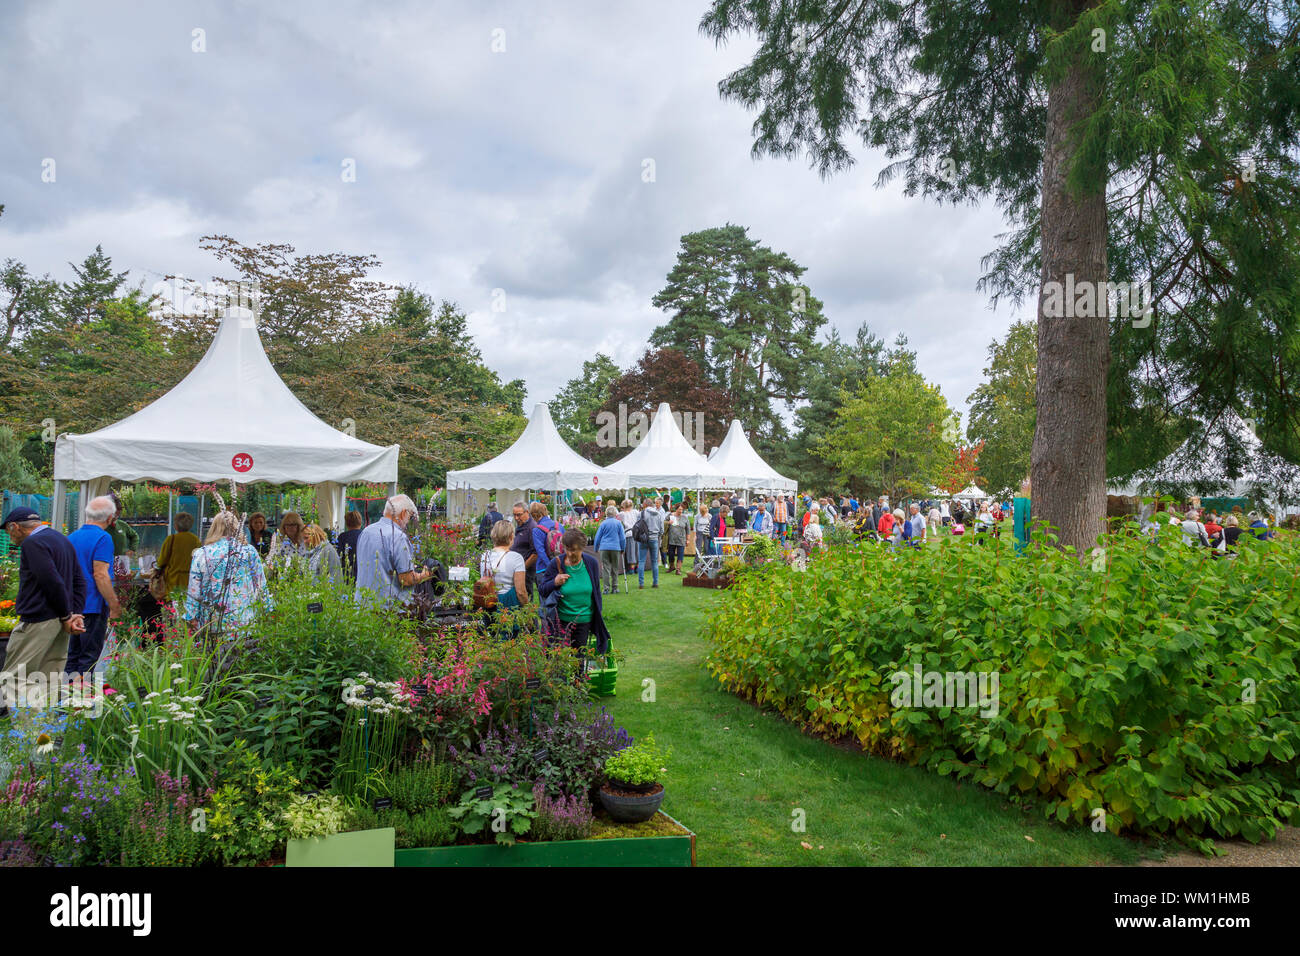 Stalls and flowers at the September 2019 Wisley Garden Flower Show at RHS Garden Wisley, Surrey, south-east England Stock Photo